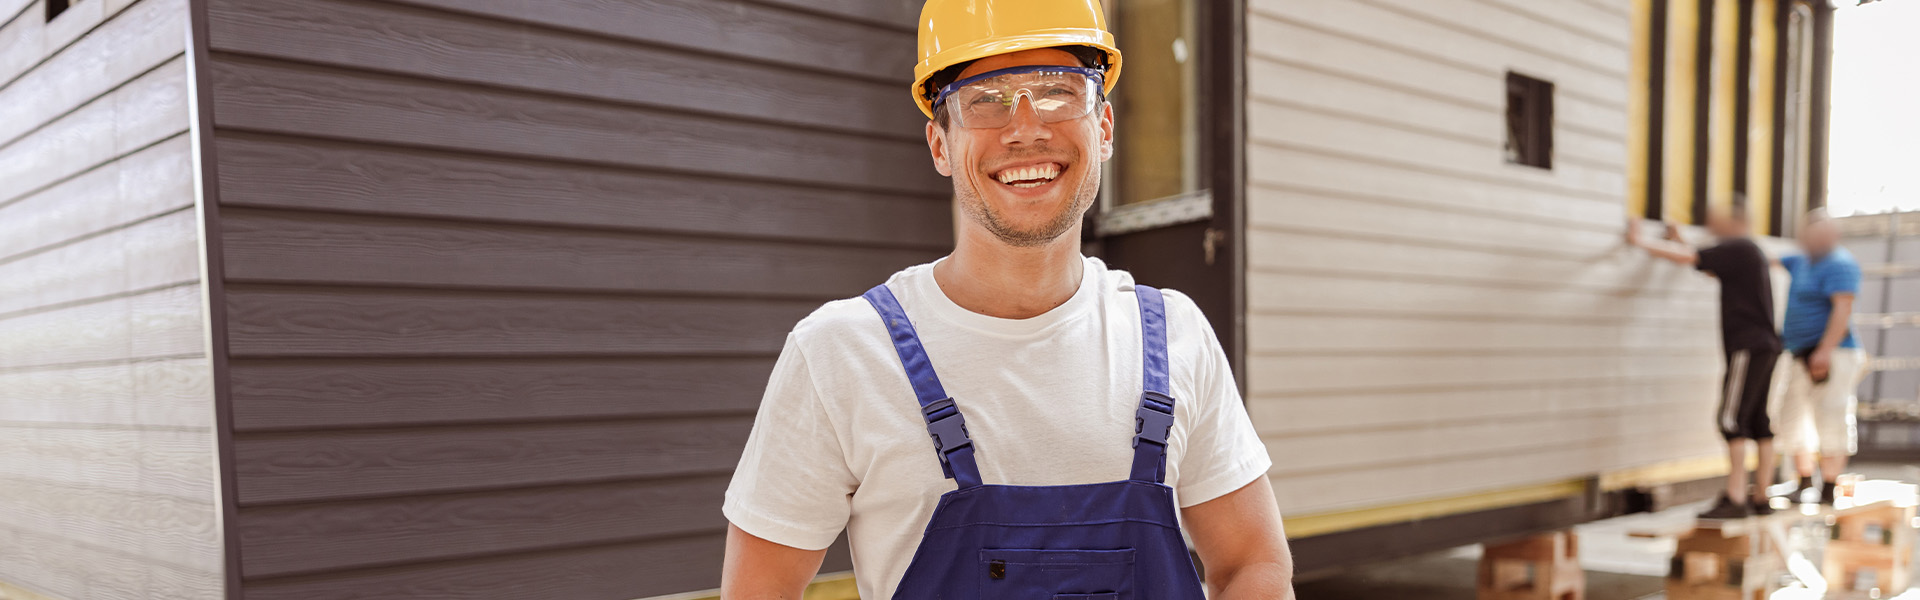 Smiling builder in front of house